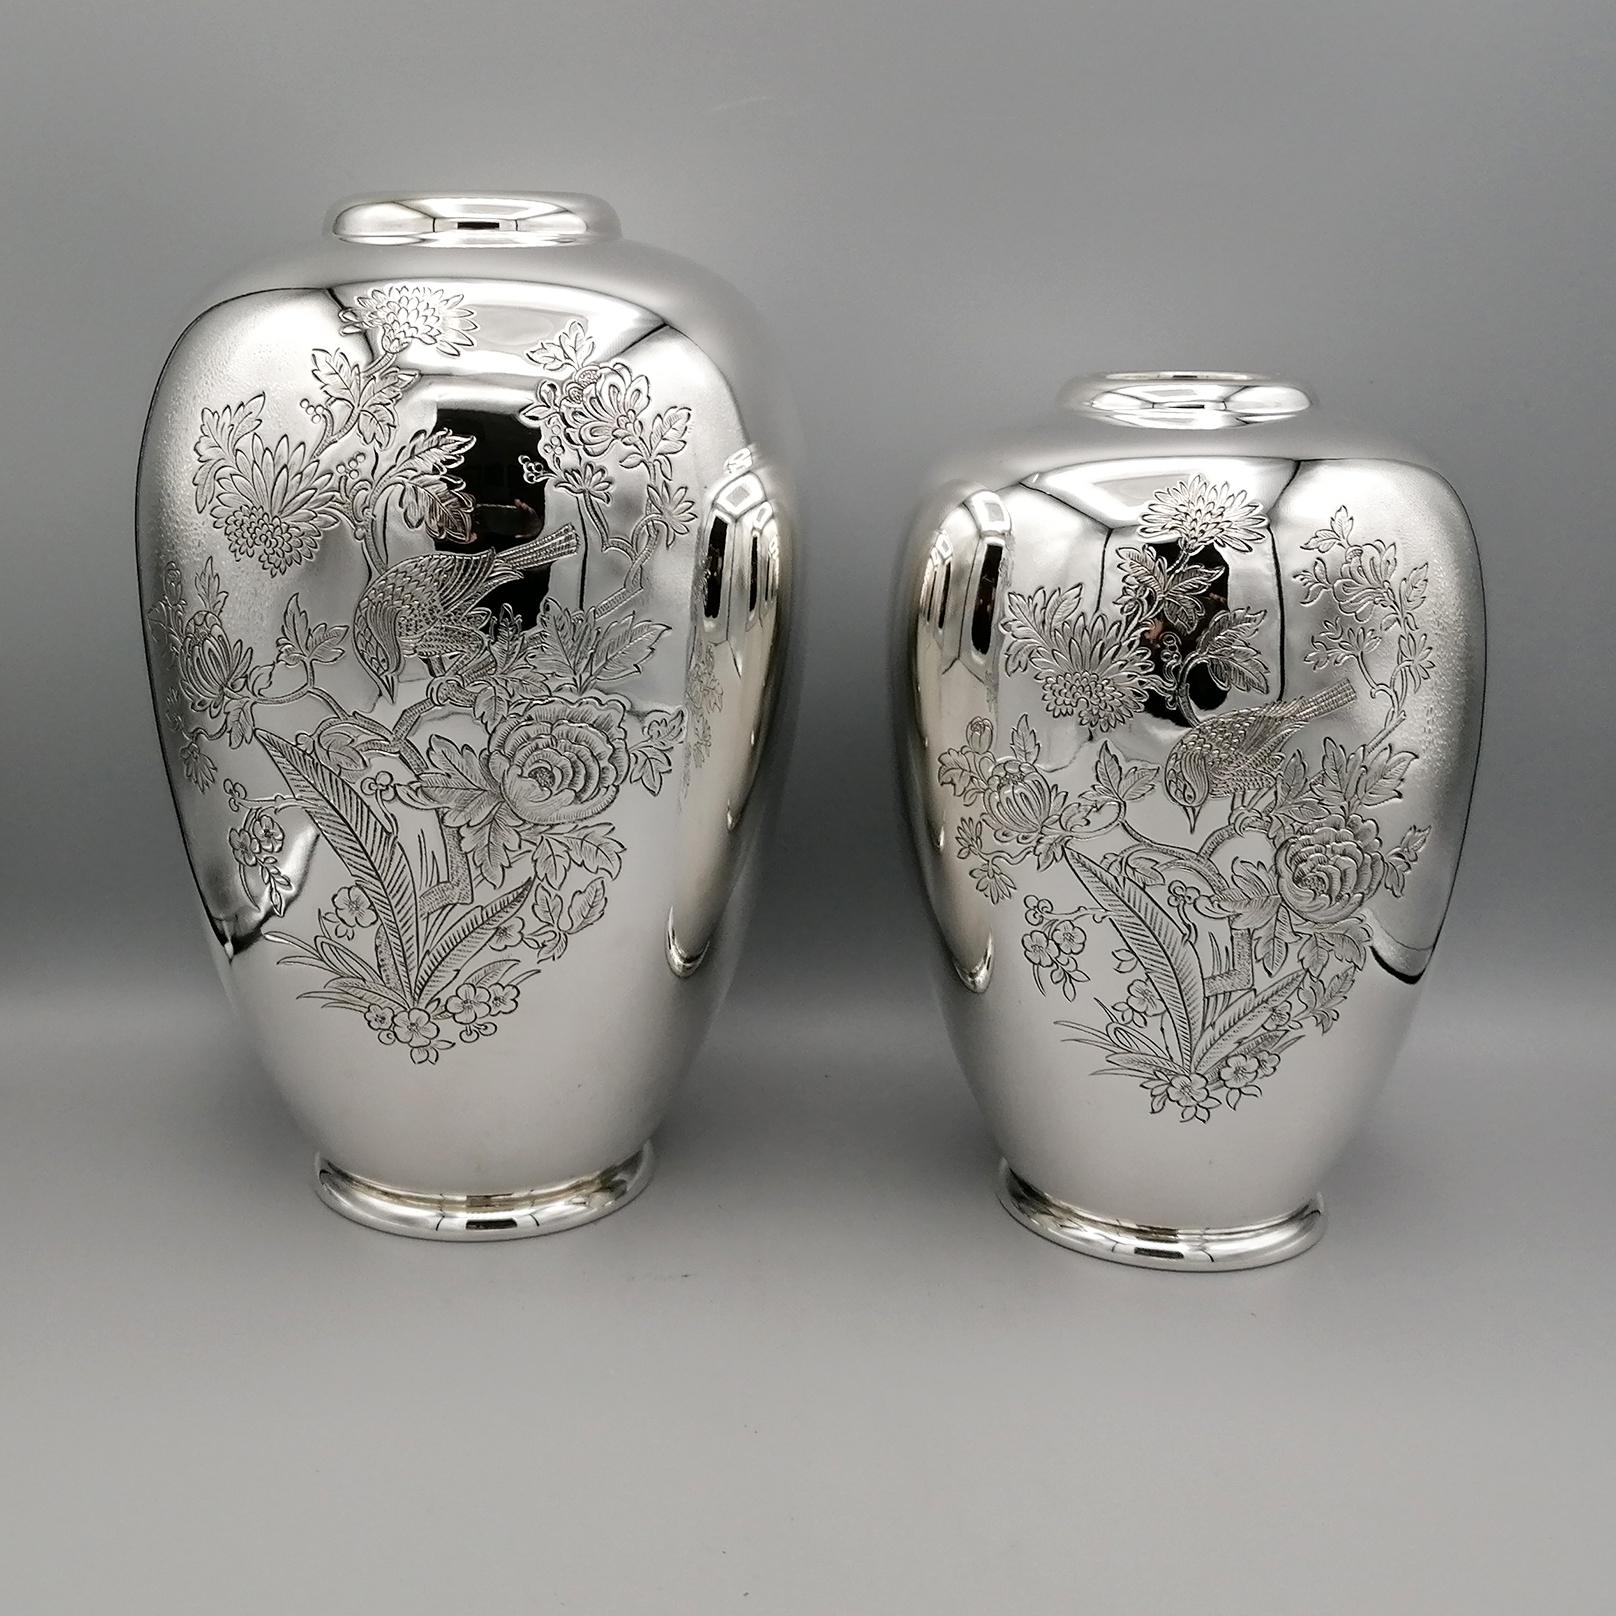 Pair of vases in 800 solid silver.
The shape of the vases is round, pot-bellied and has been made with a smooth and glossy finish.
The vases were embellished with a hand engraving depicting an oriental scene with a bird in the middle within